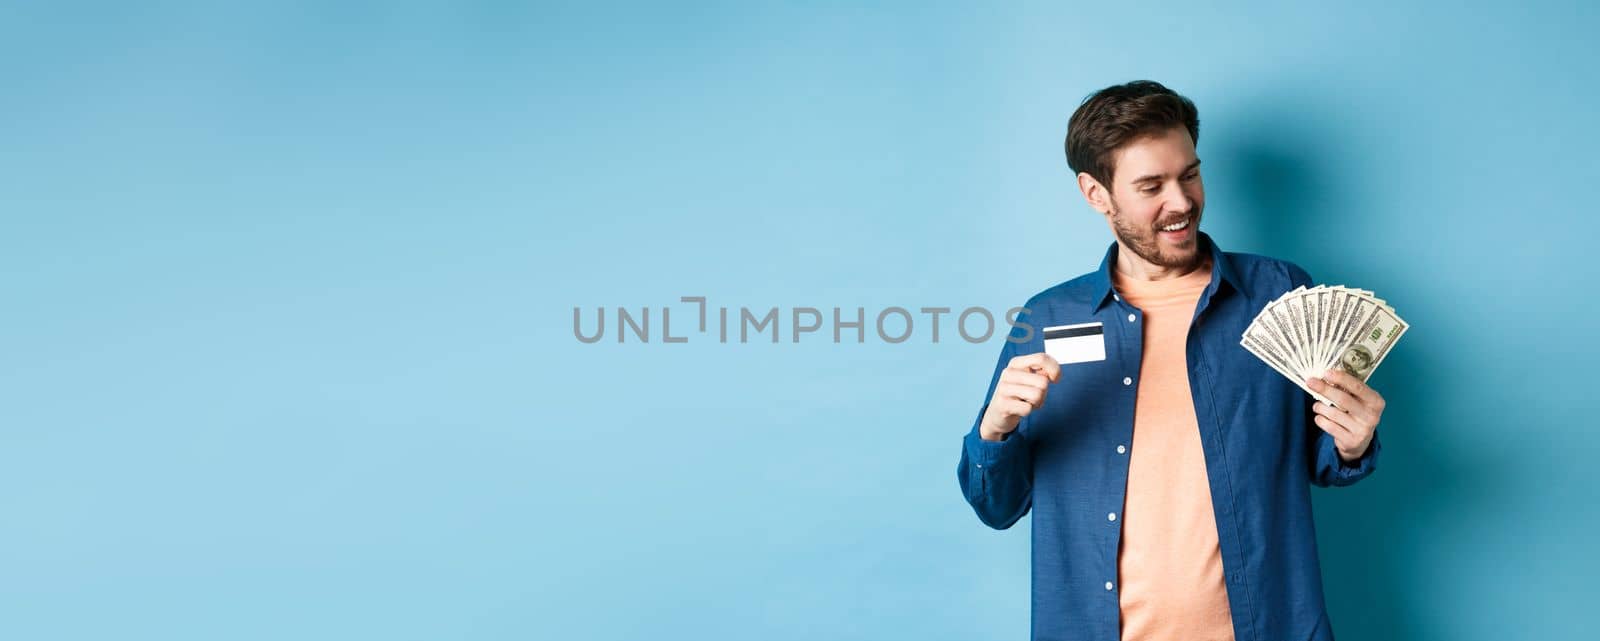 Smiling modern guy looking at cash and showing plastic credit card, standing on blue background. Copy space